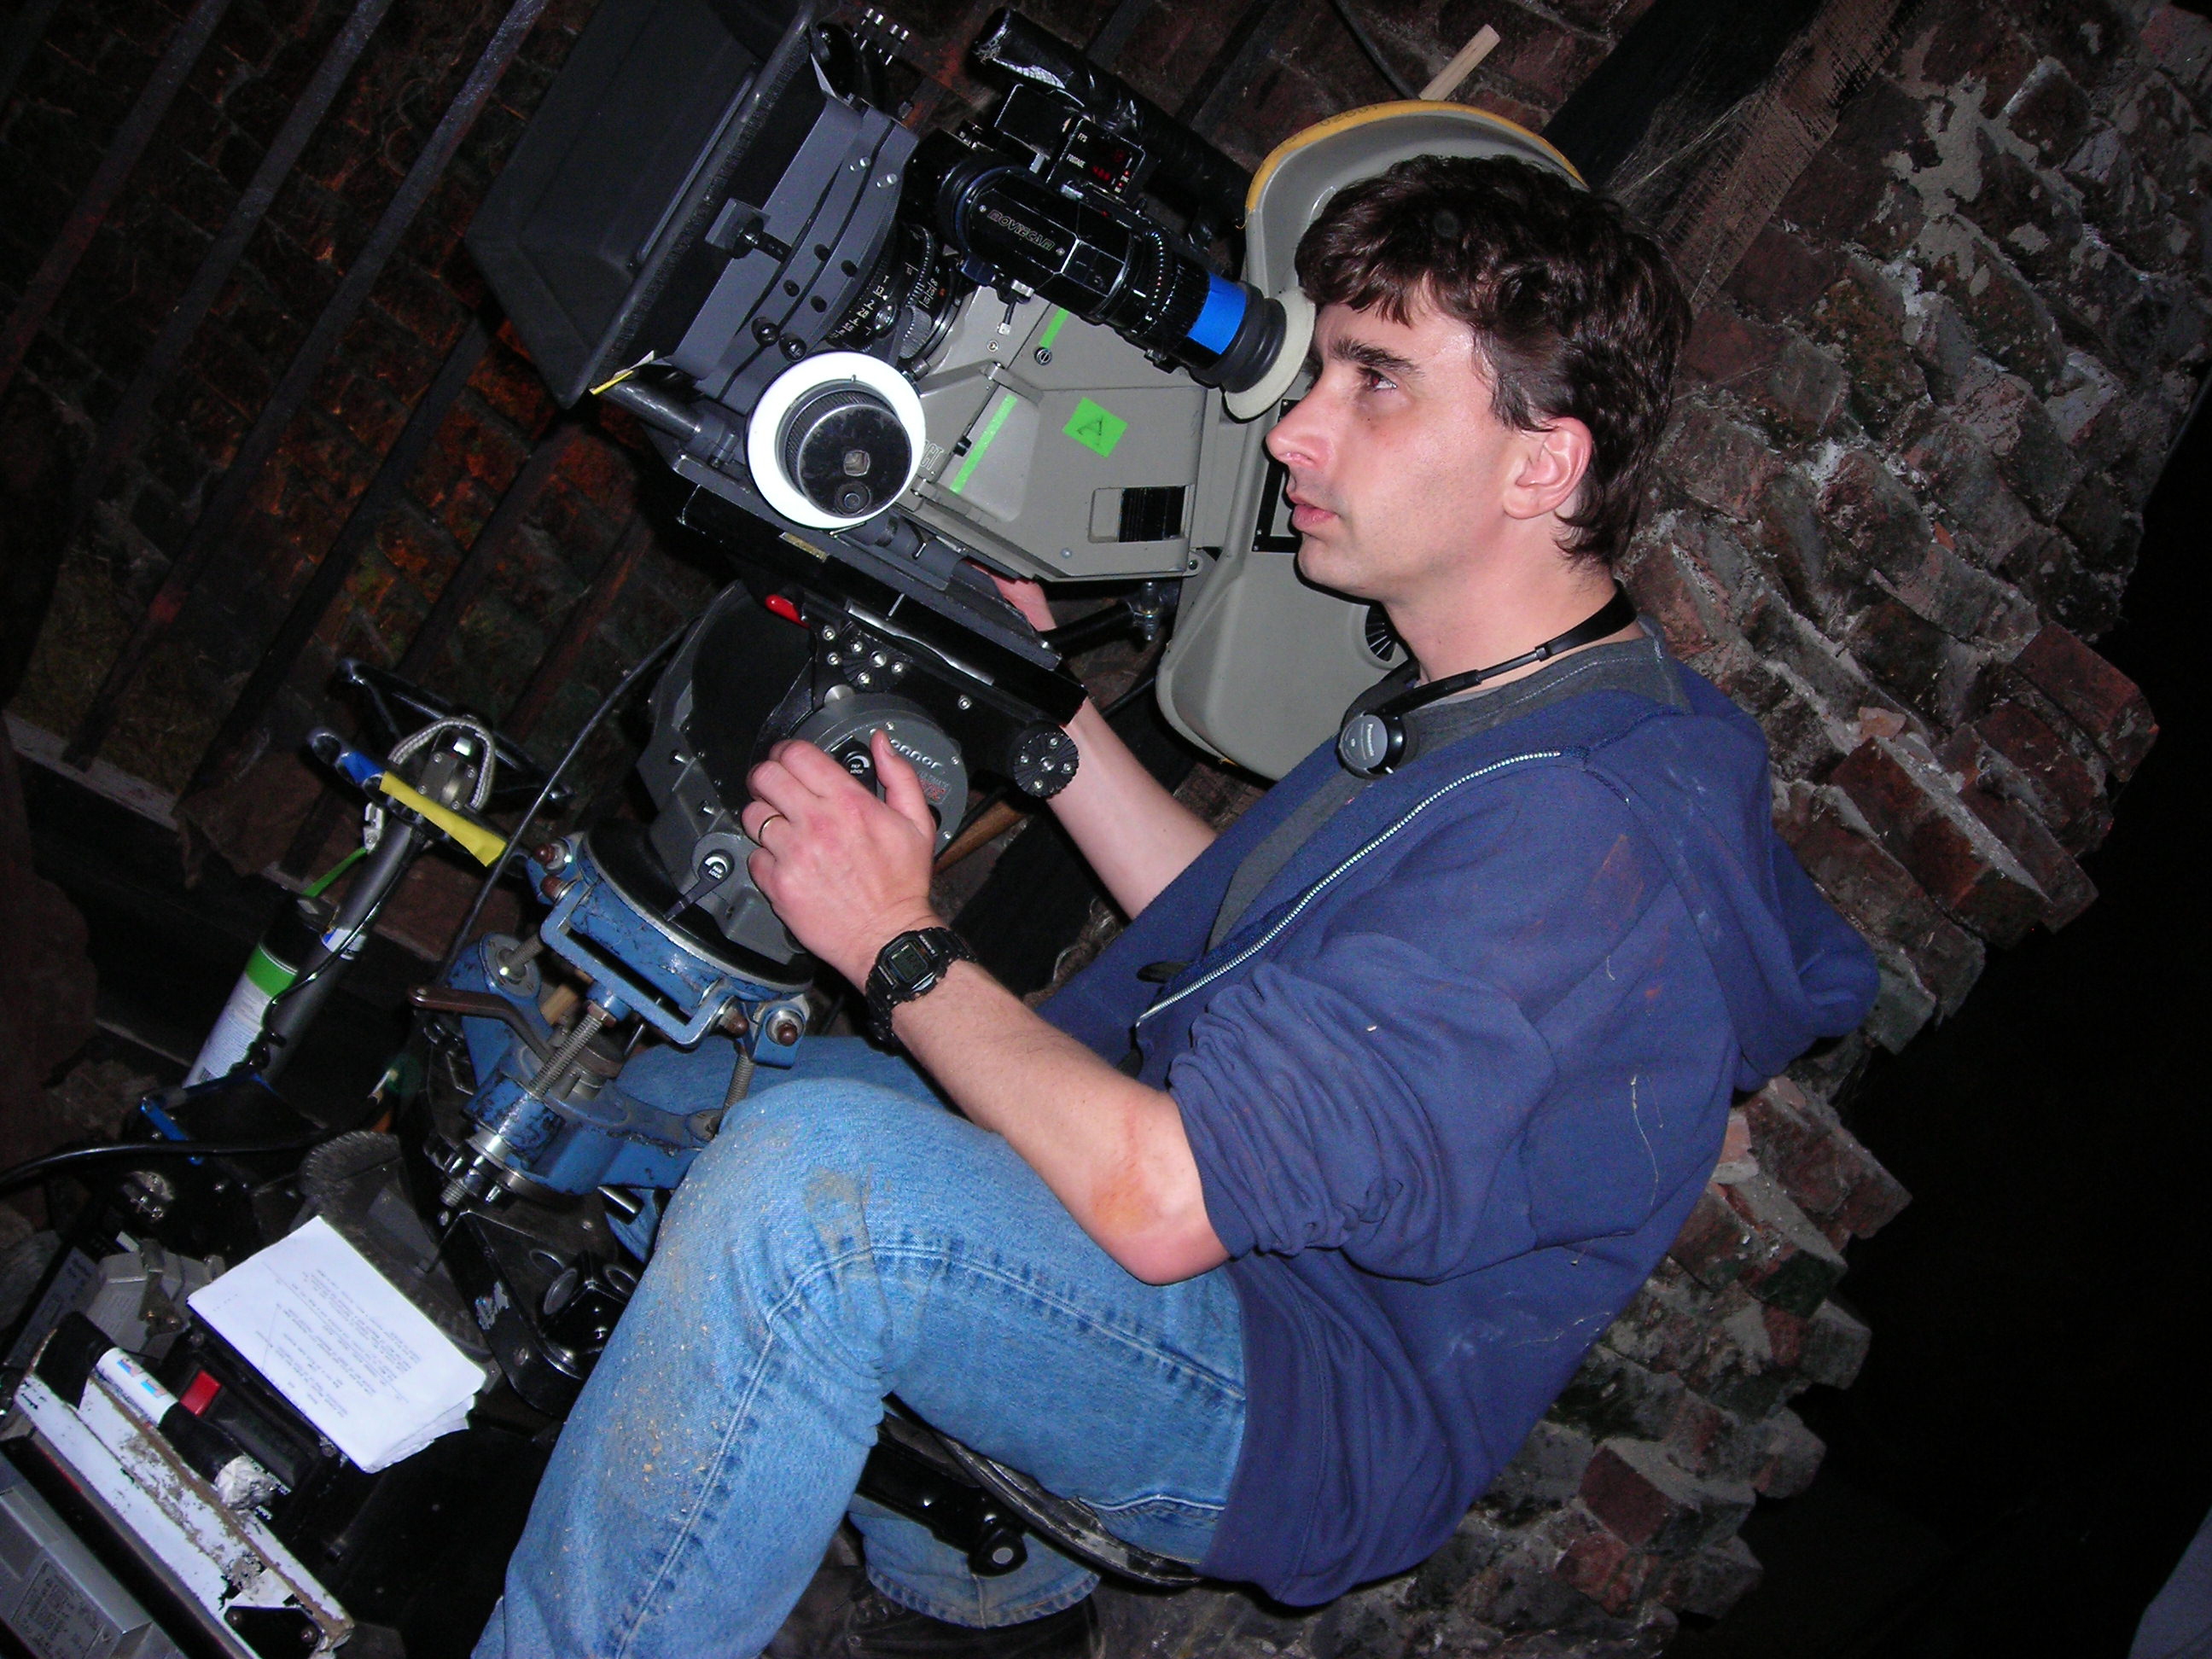 Director and Co-Writer Anthony C. Ferrante on the set of HEADLESS HORSEMAN